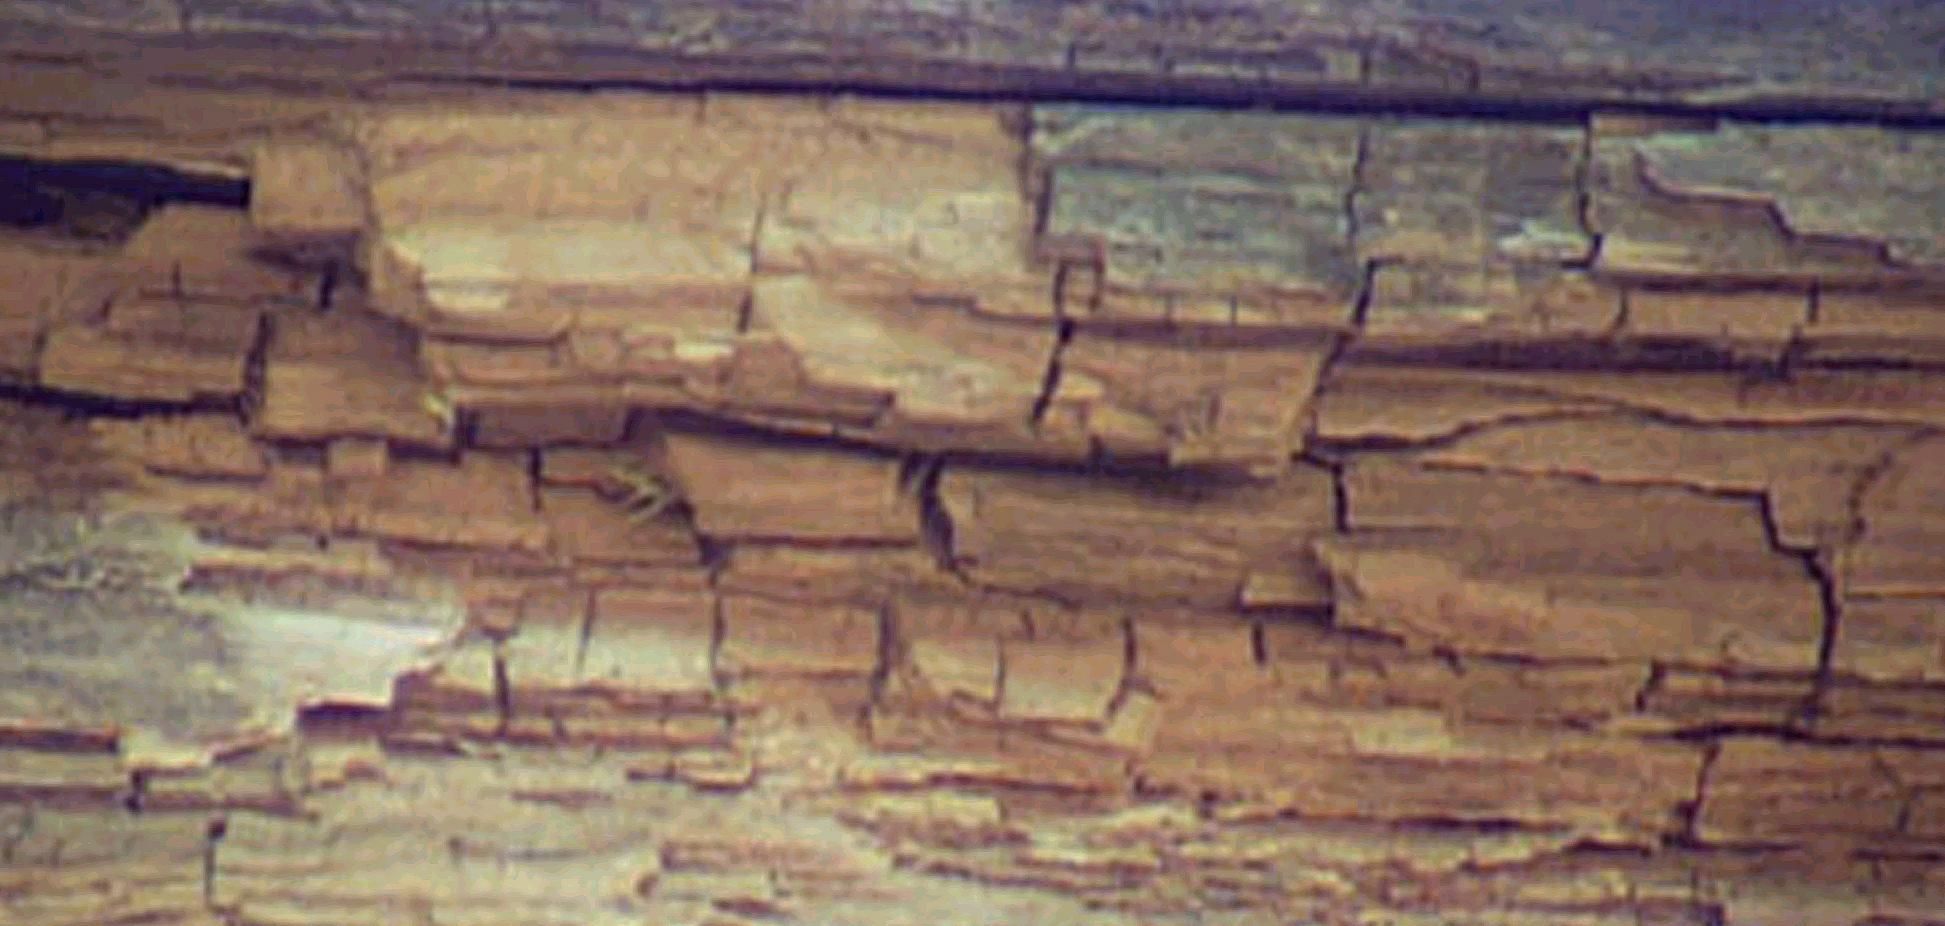 termite damage or wood rot